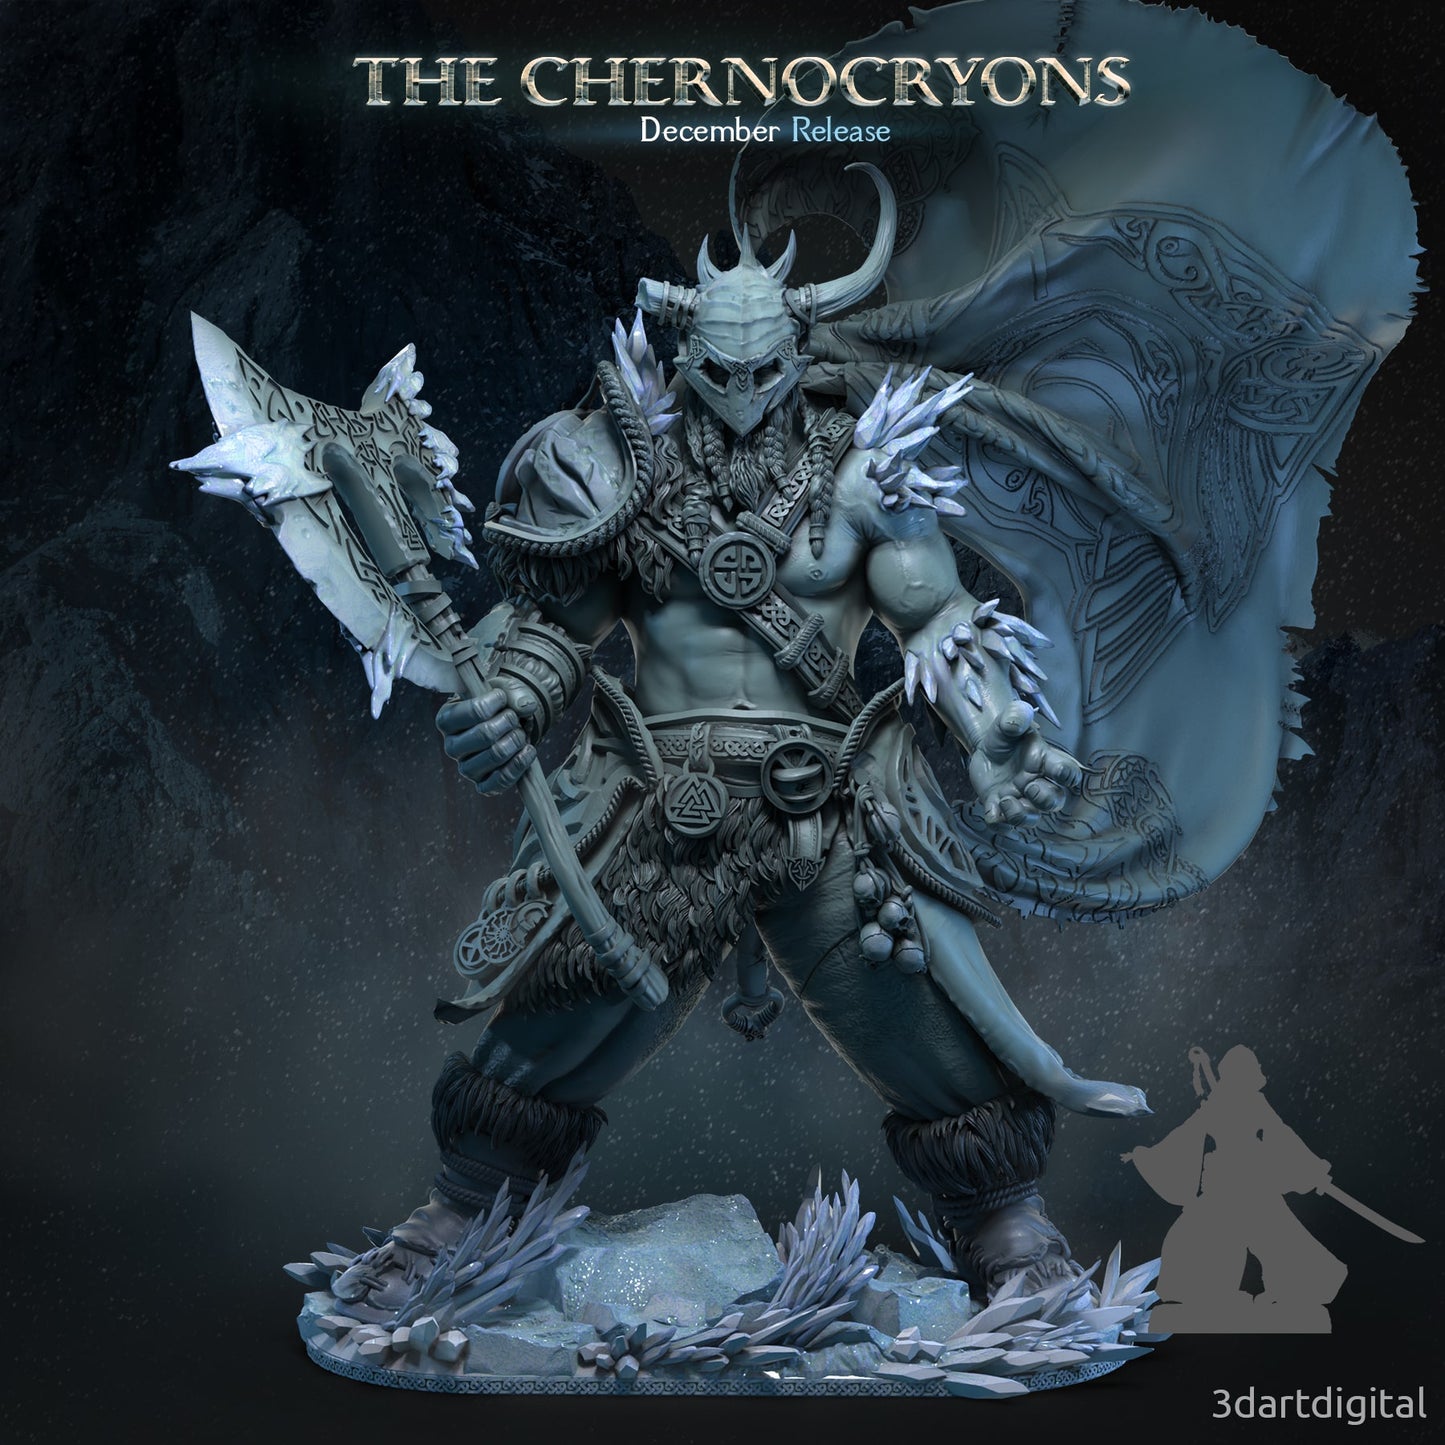 Warrior - The Chernocryons